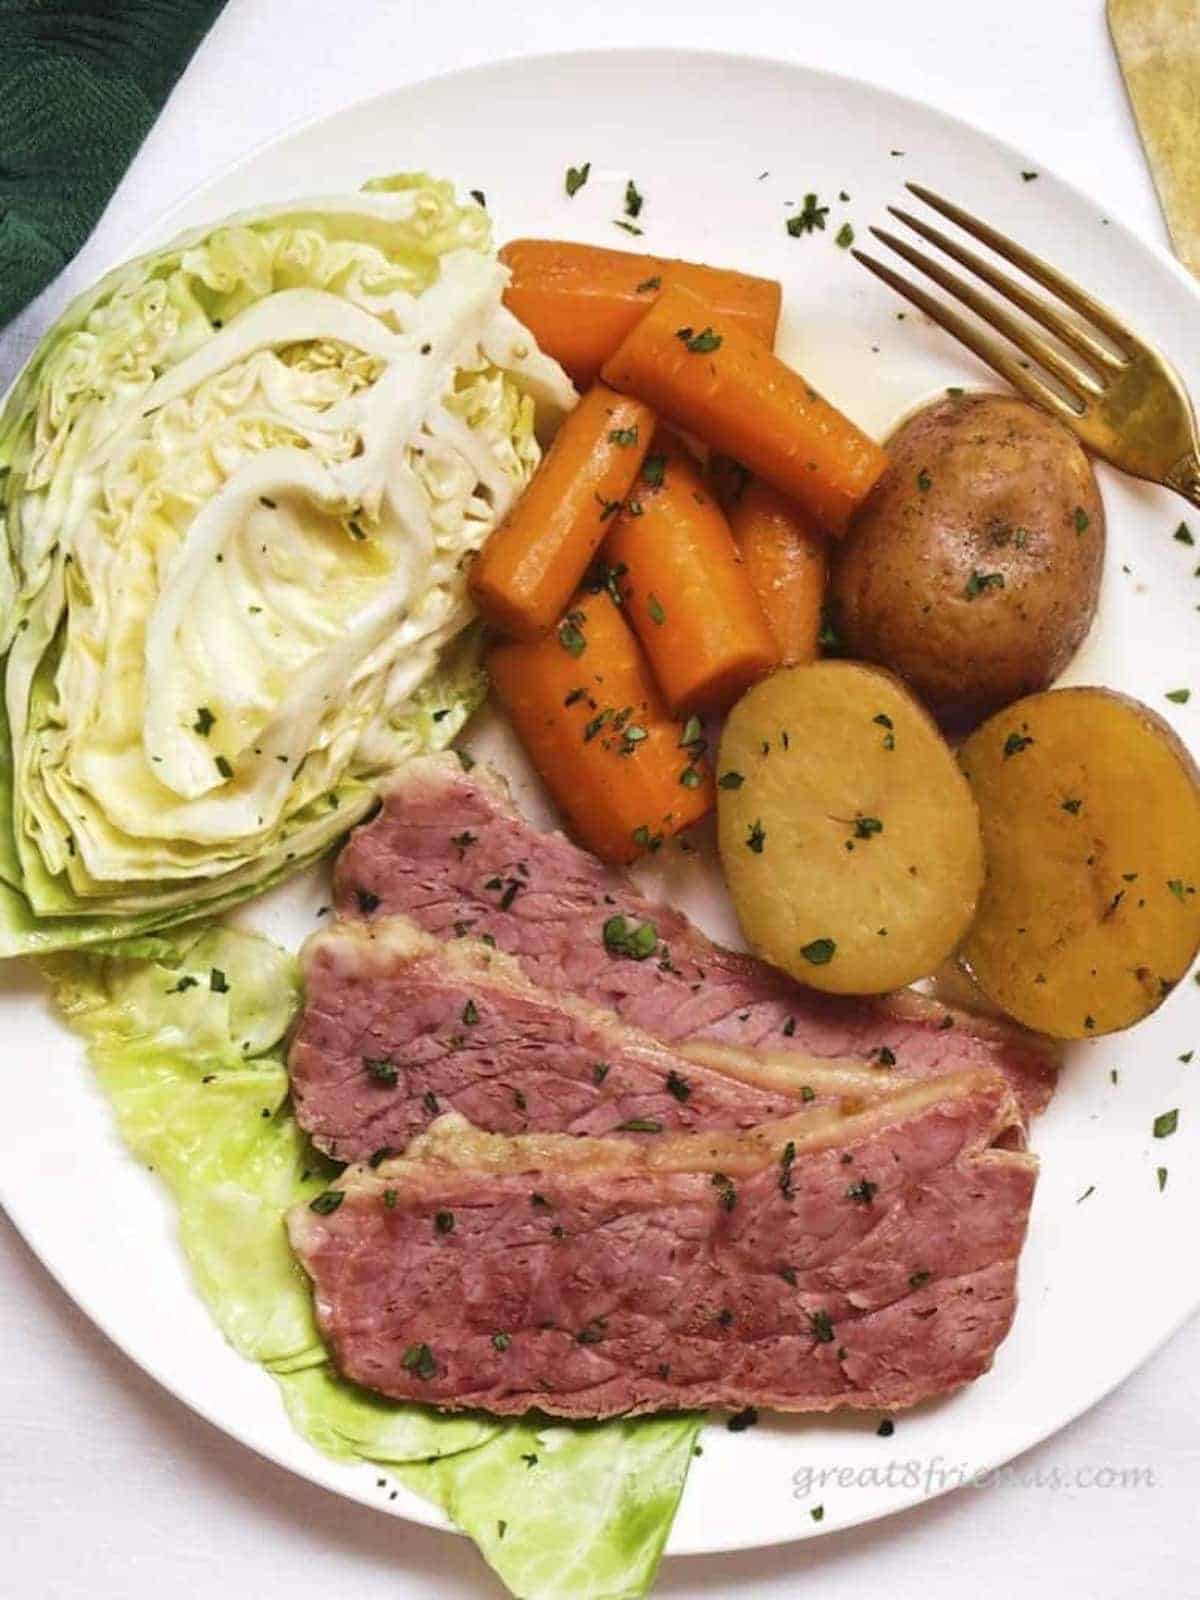 Dinner plate filled with sliced corned beef, a wedge of cabbage, potatoes and carrots.